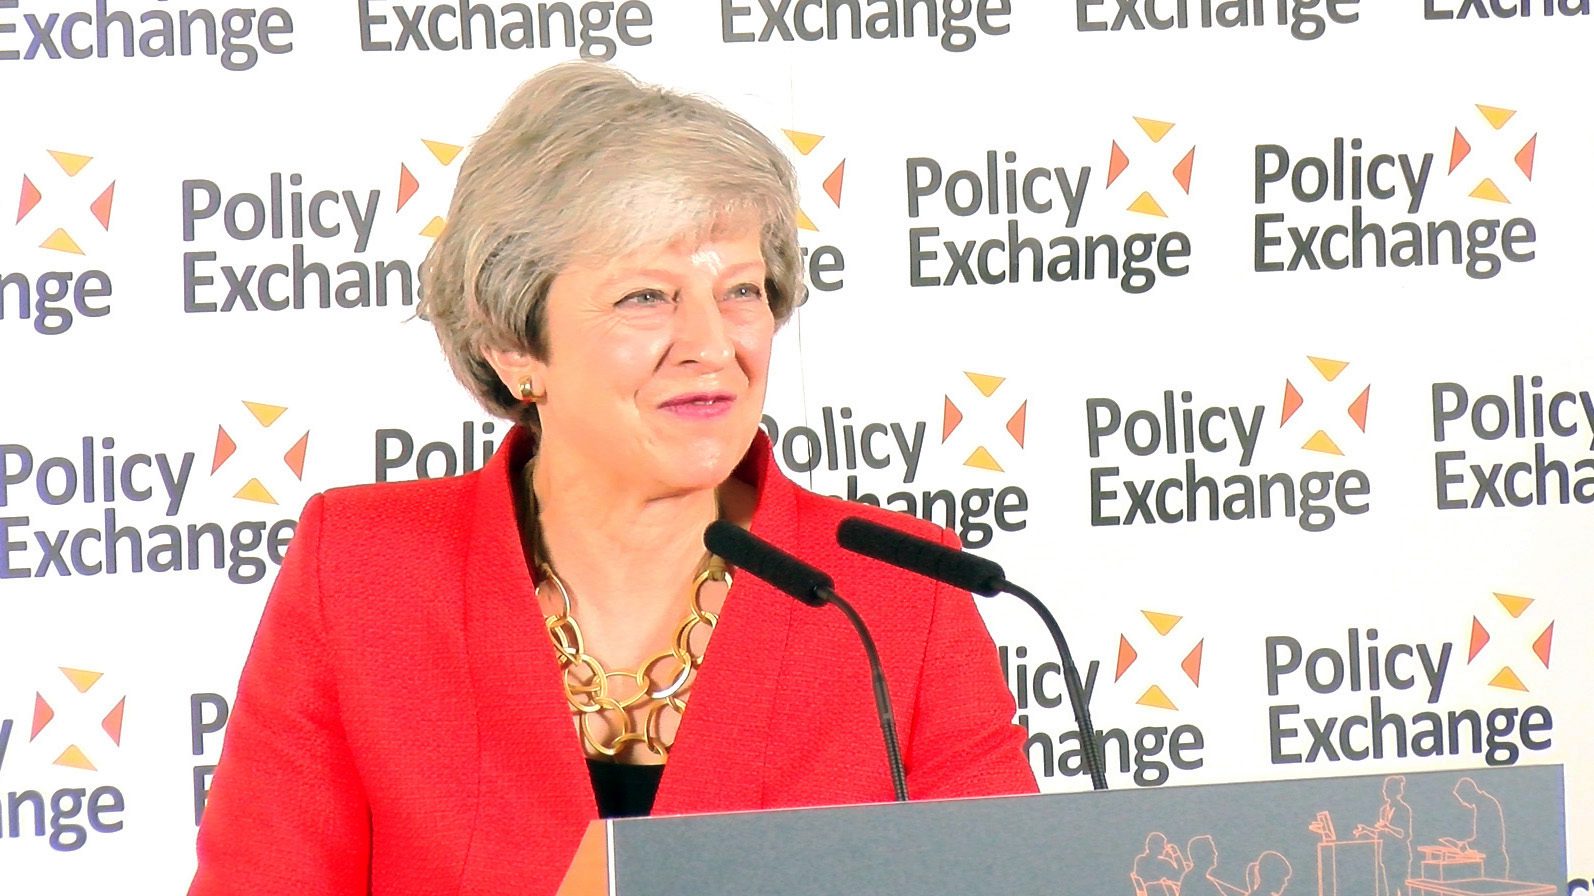 Prime Minister visits Policy Exchange to launch the Augar Report